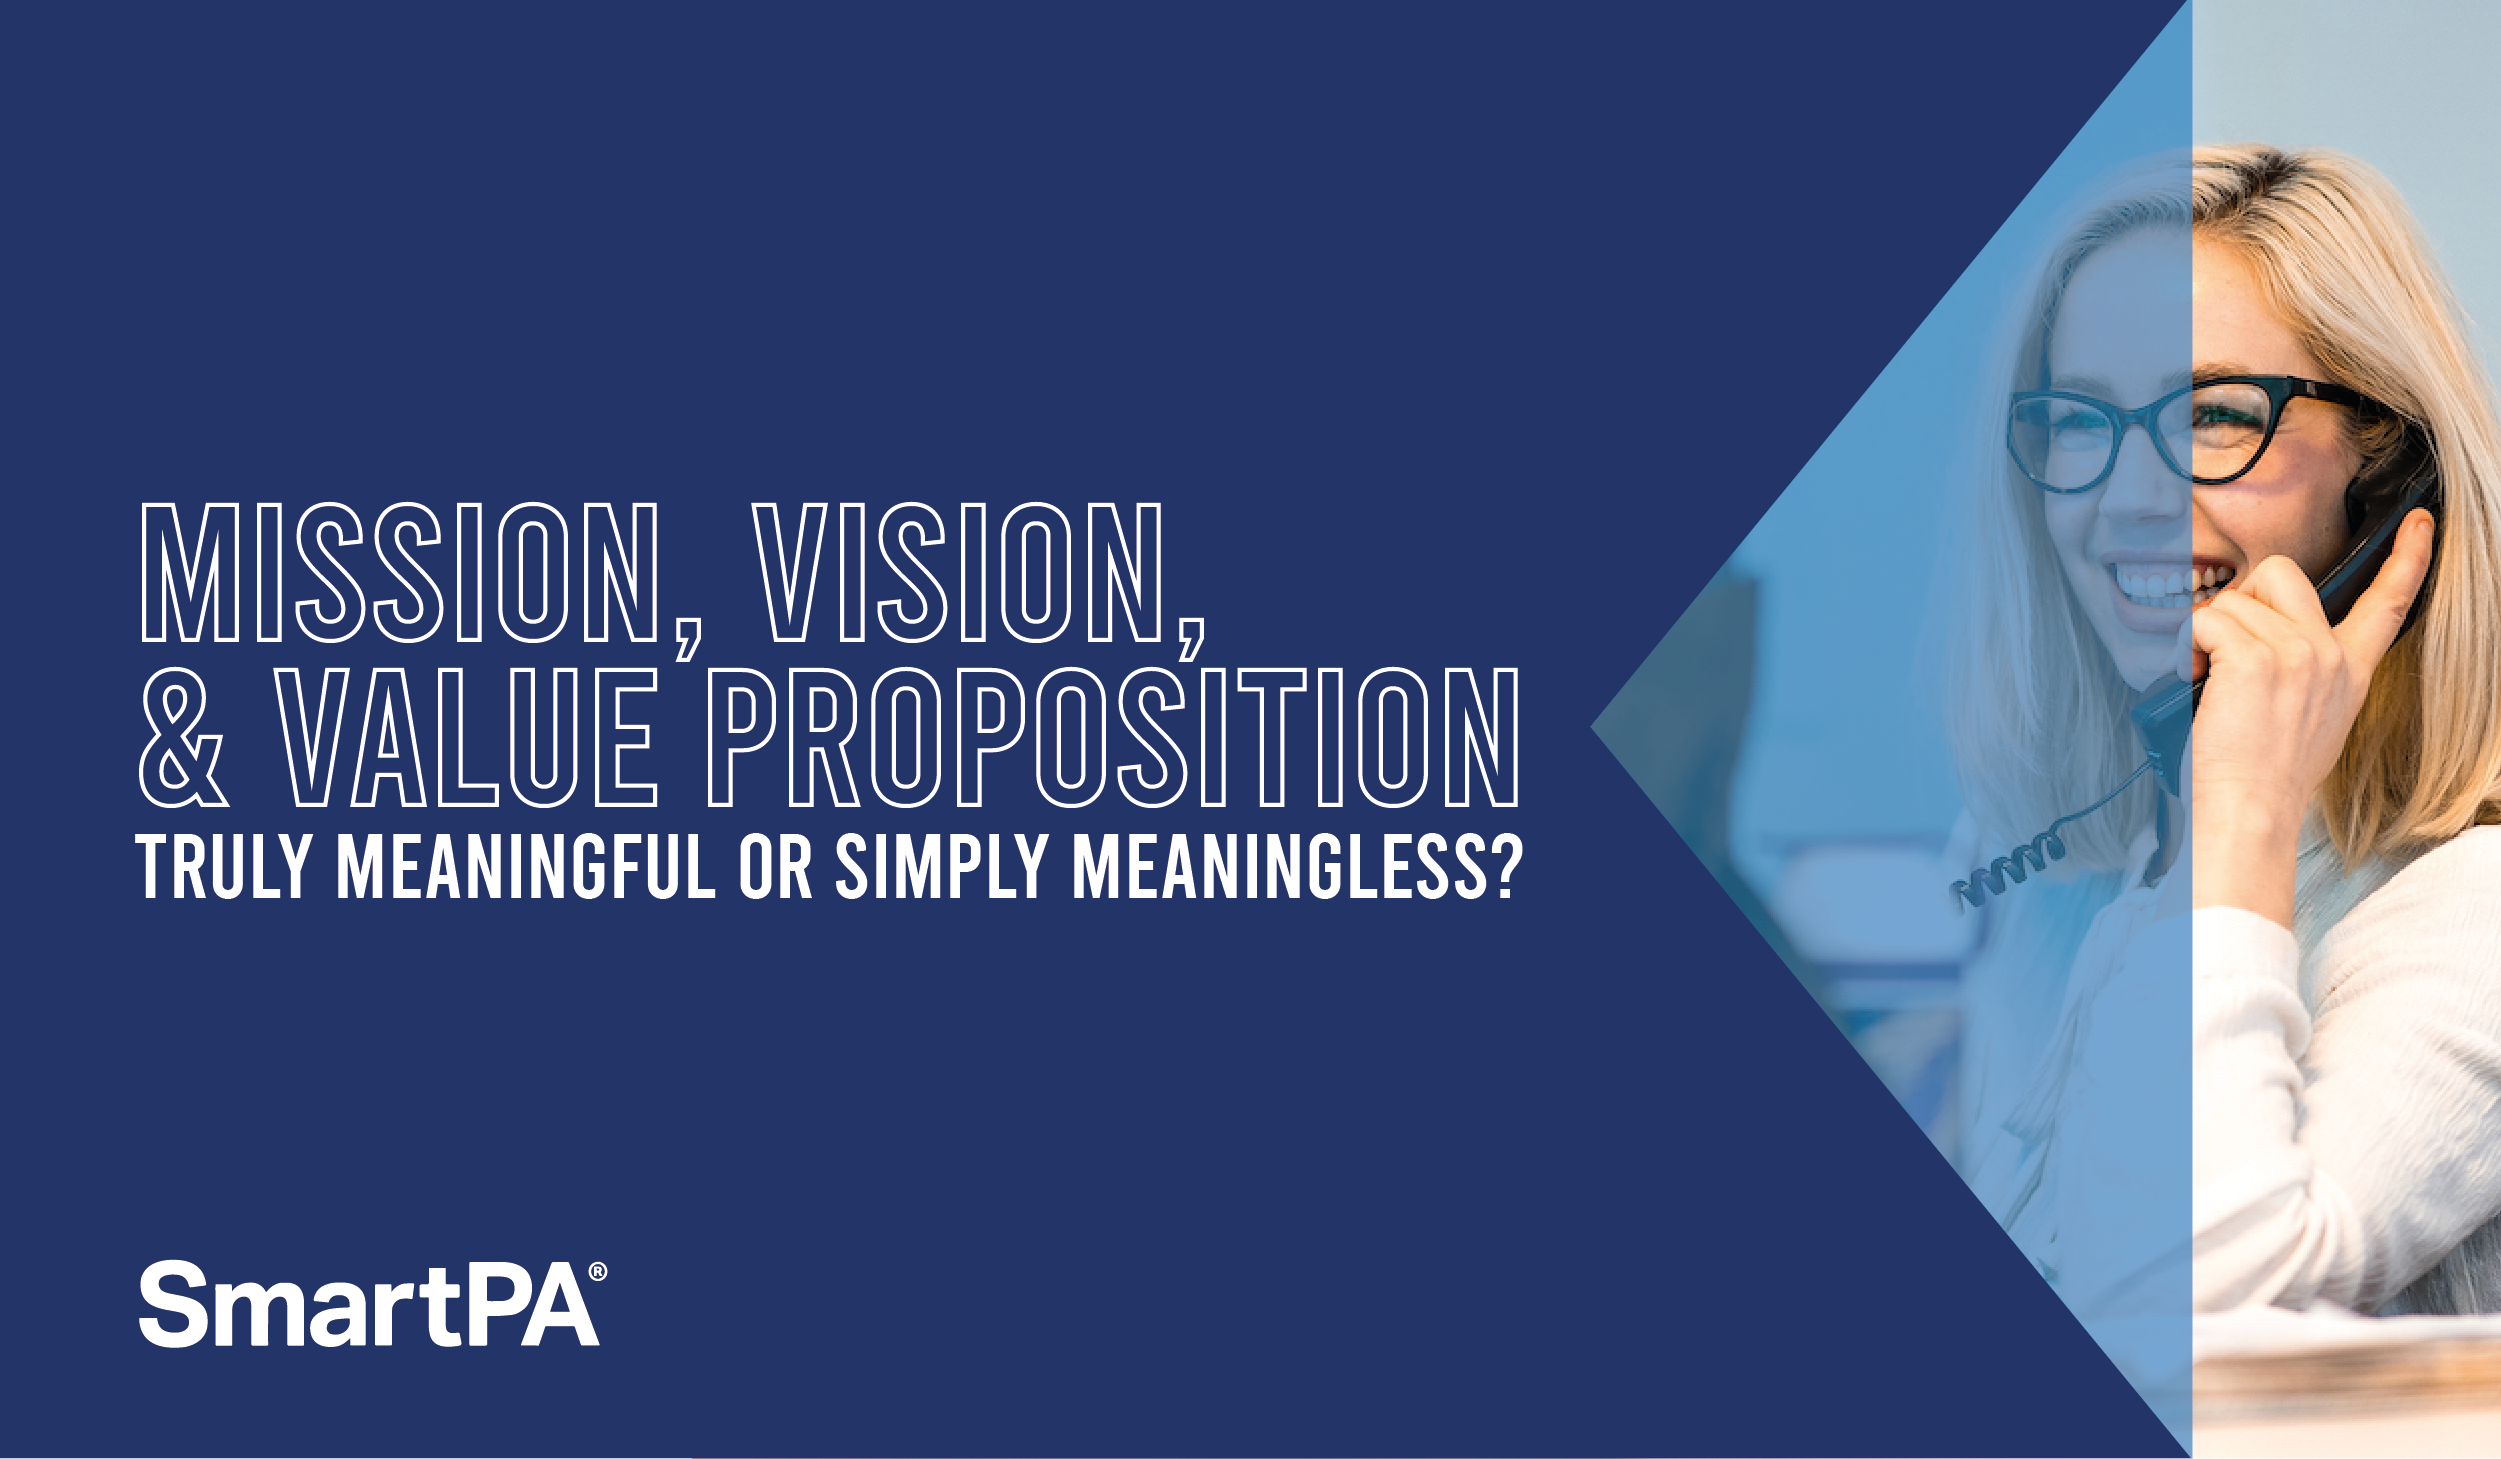 Mission, Vision and Value Proposition: Meaningful or meaningless?